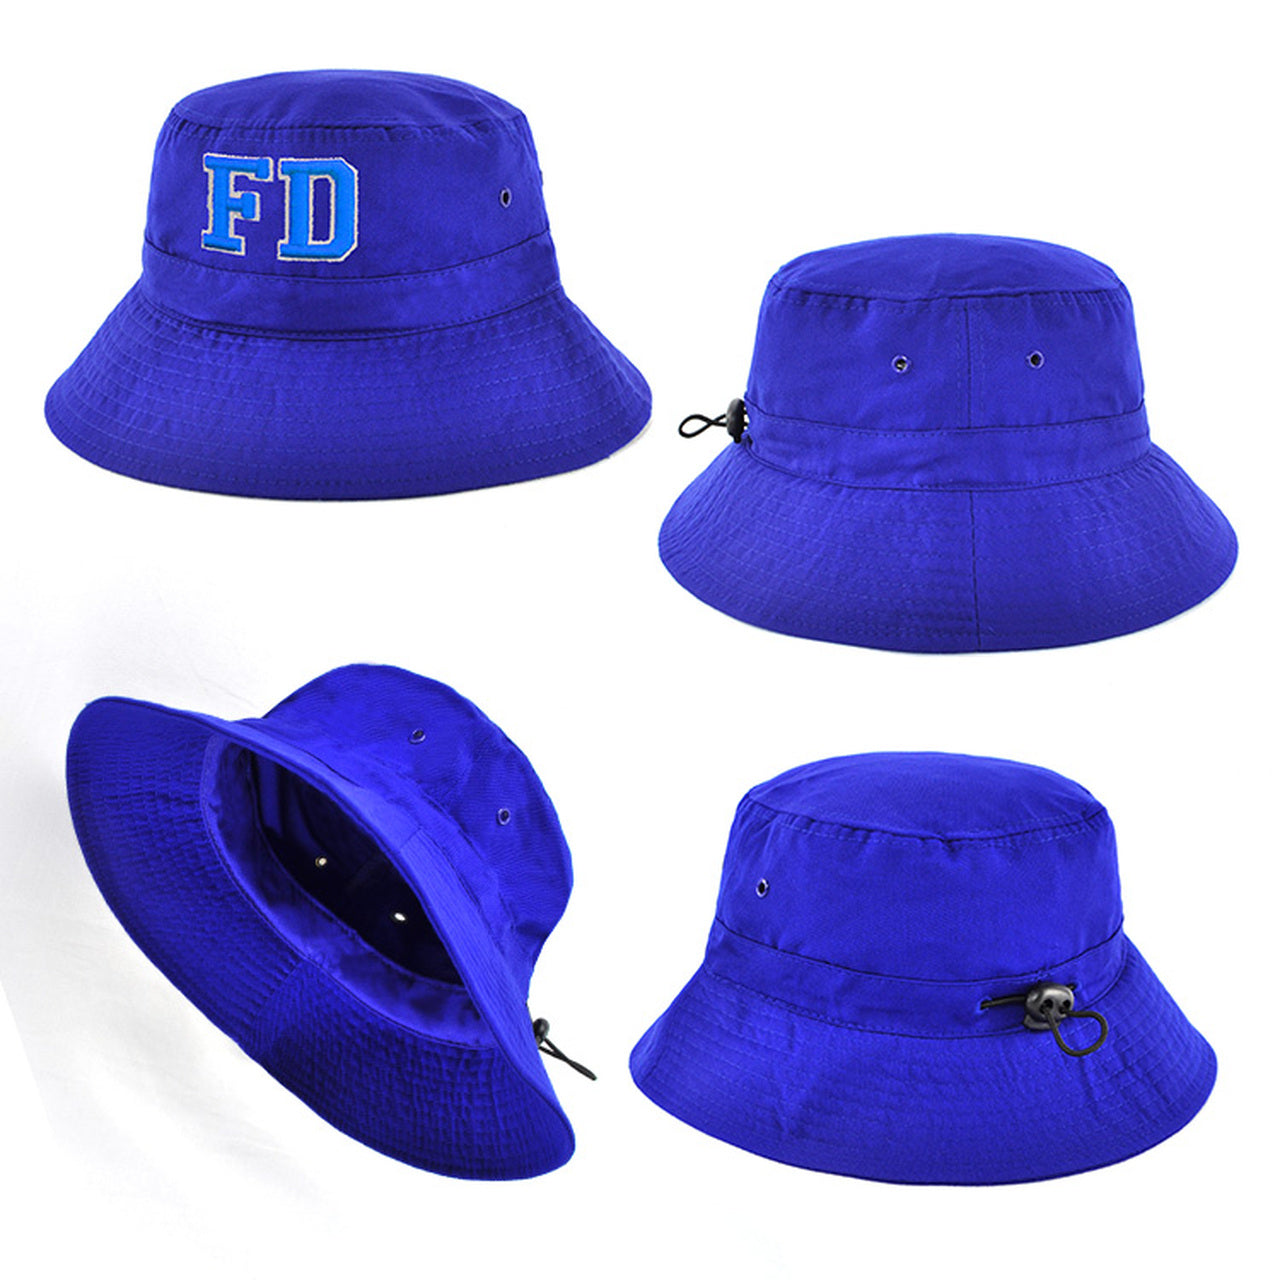 Grace Collection Polyviscose Bucket Hat Ah690